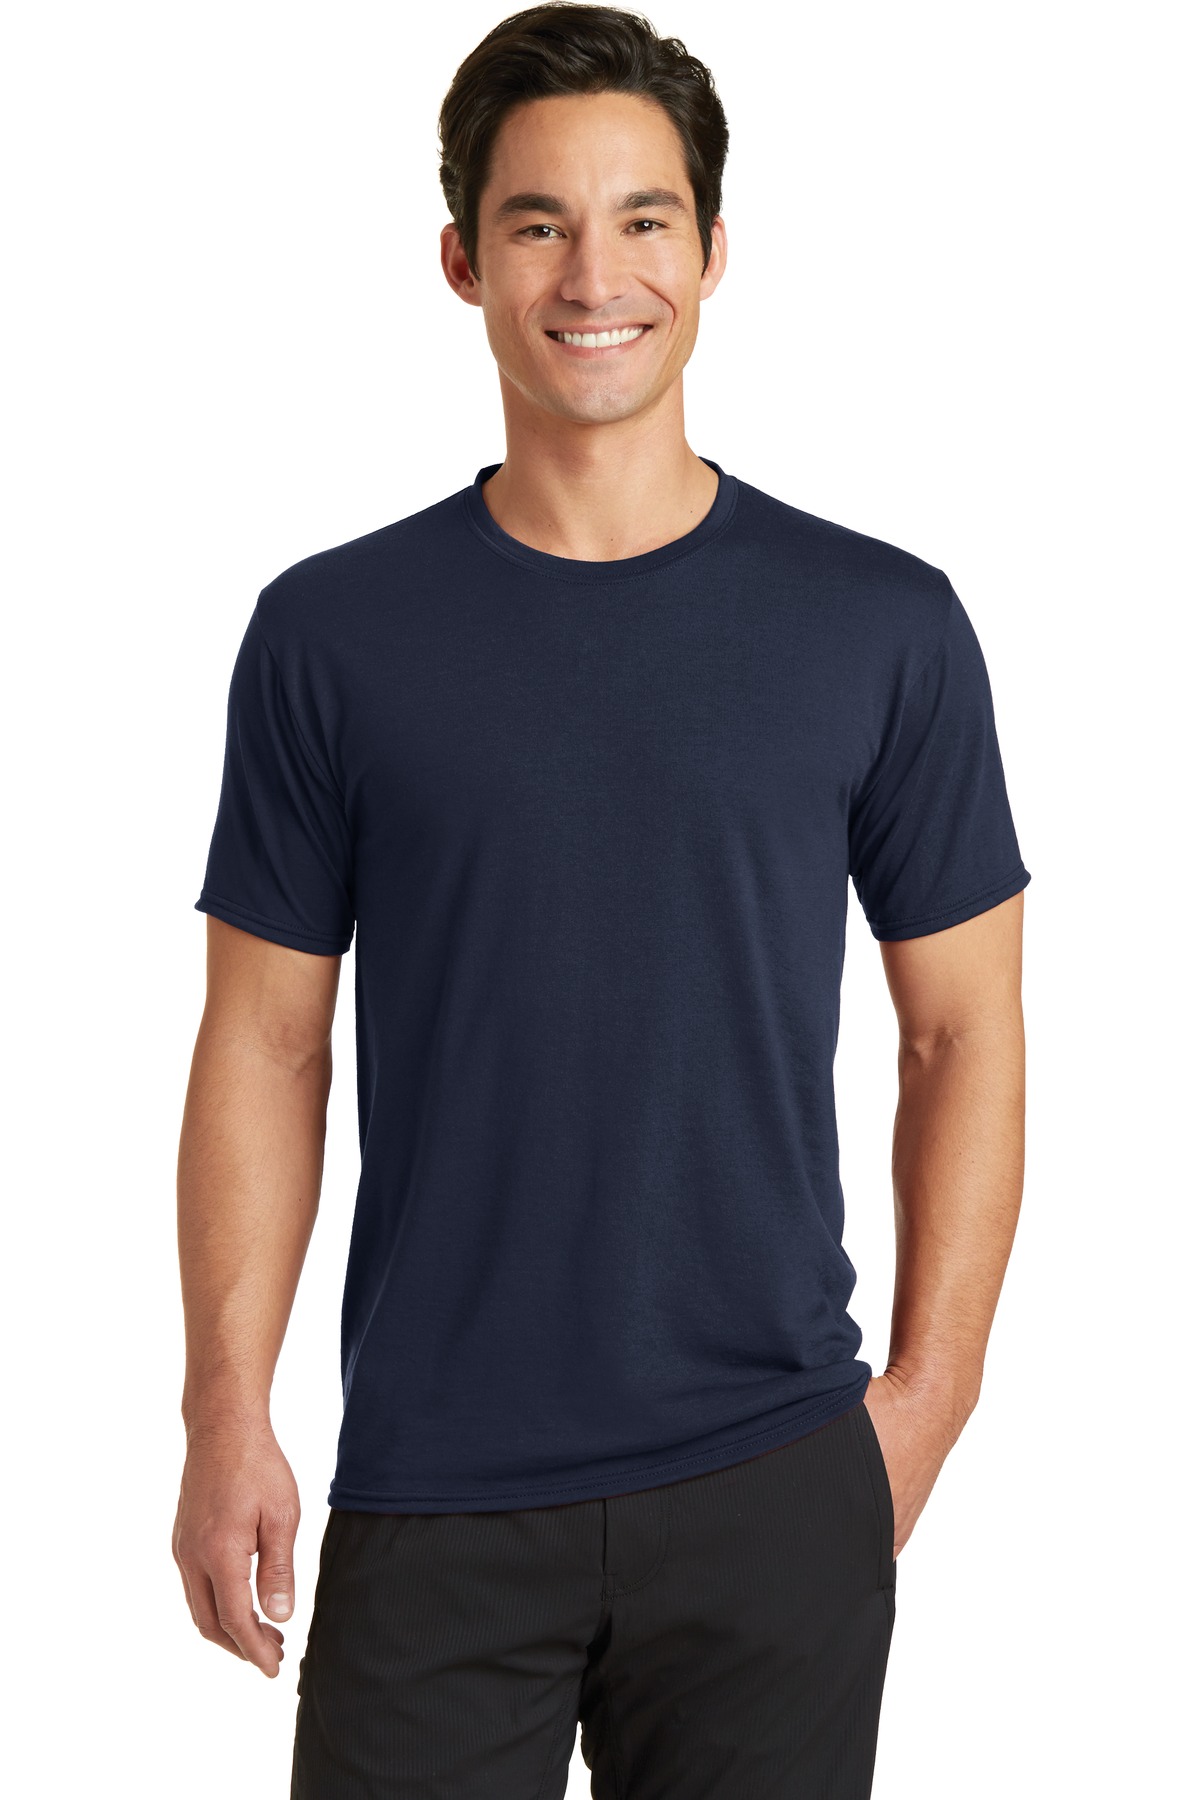 Port & Company PC381 - Essential Blended Performance Tee - T-Shirts